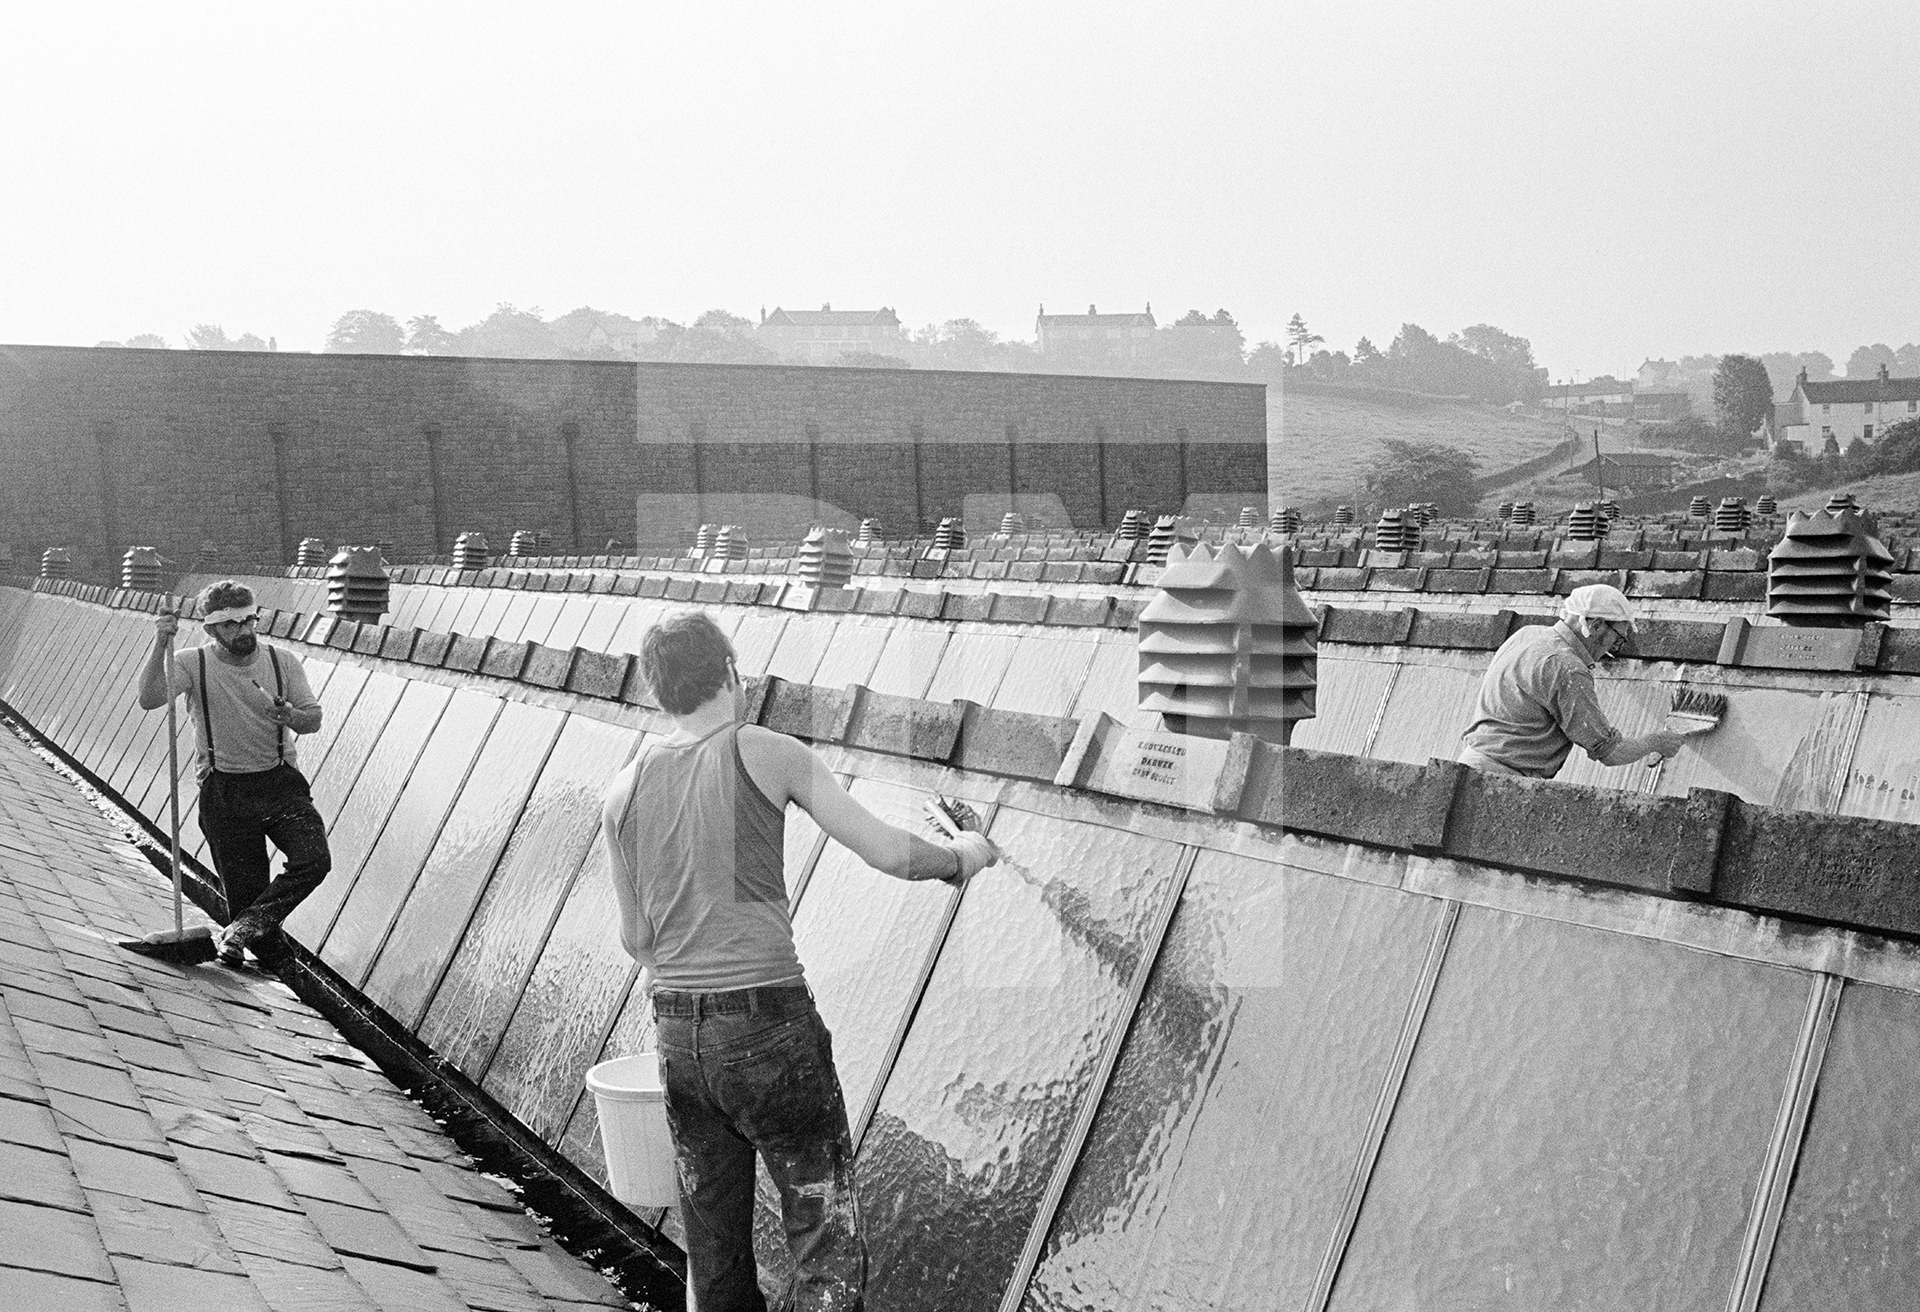 Whitewashing the lights (glass) of the shed roof to keep out the summer sunshine and make it cooler for the weavers. Saturday 26 June 1976 by Daniel Meadows